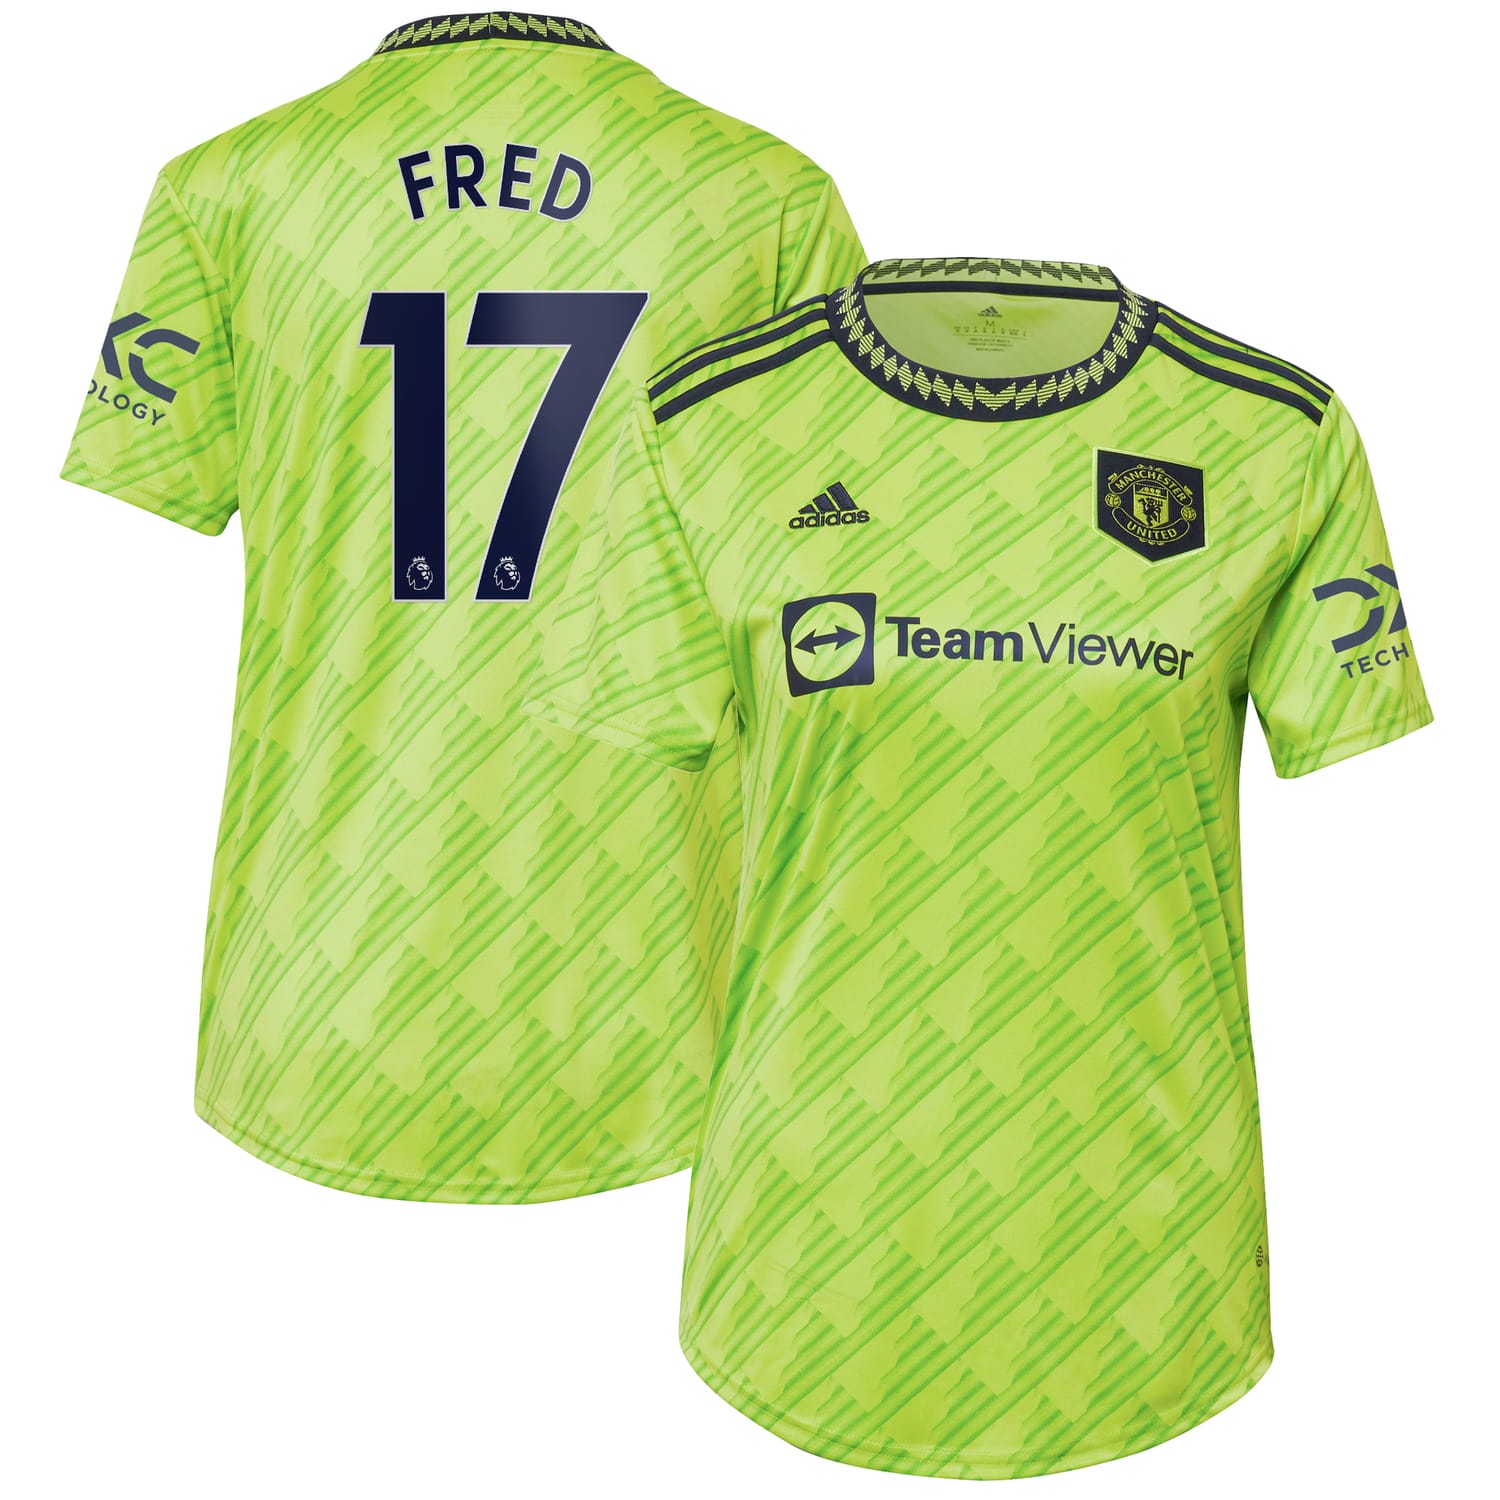 Premier League Manchester United Third Jersey Shirt 2022-23 player Fred 17 printing for Women